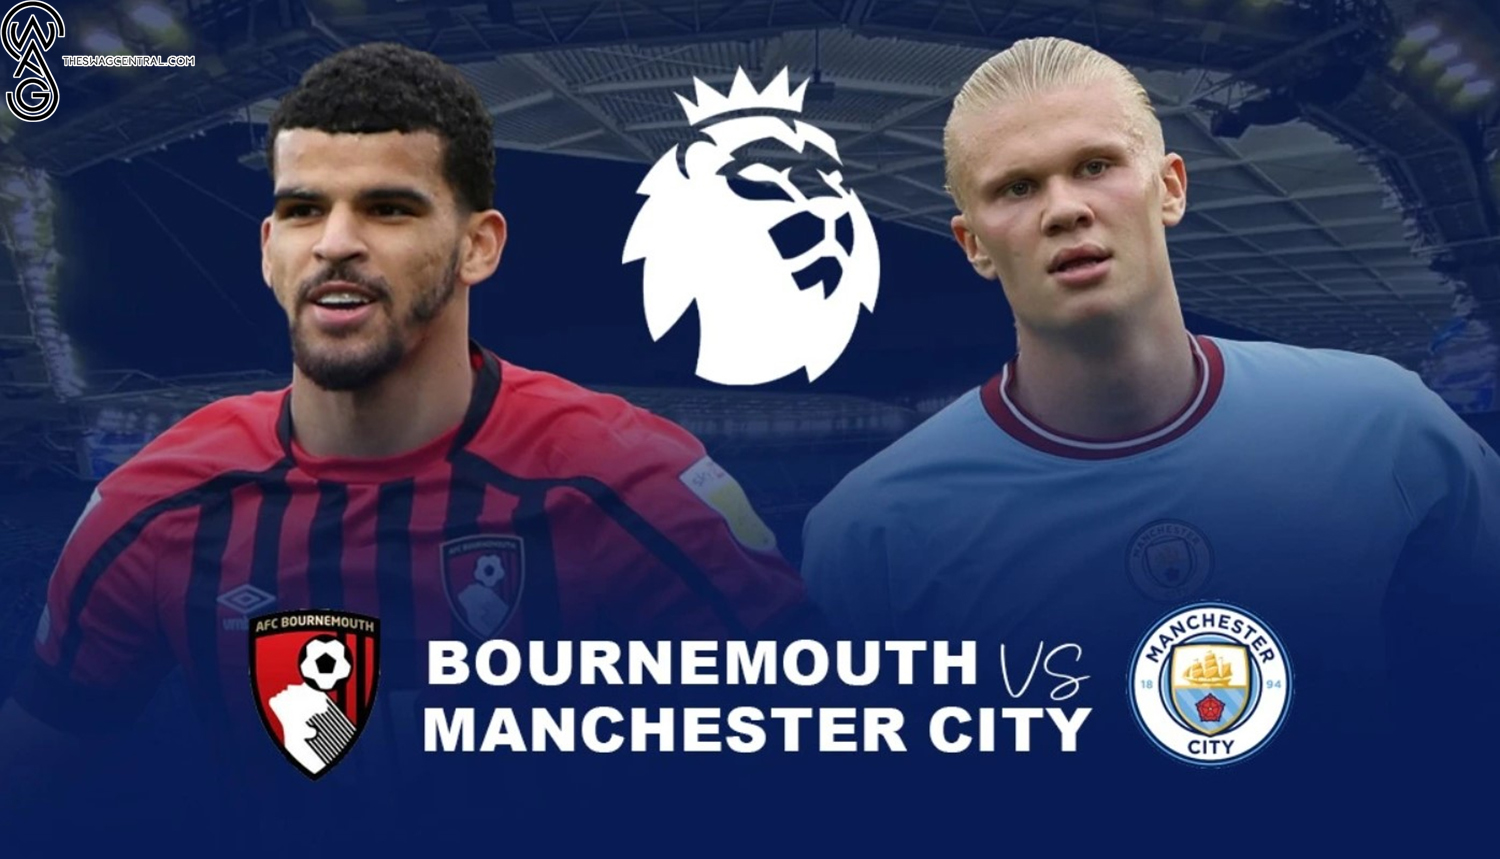 Clash of Aspirations Bournemouth’s Grit Meets Manchester City’s Grace